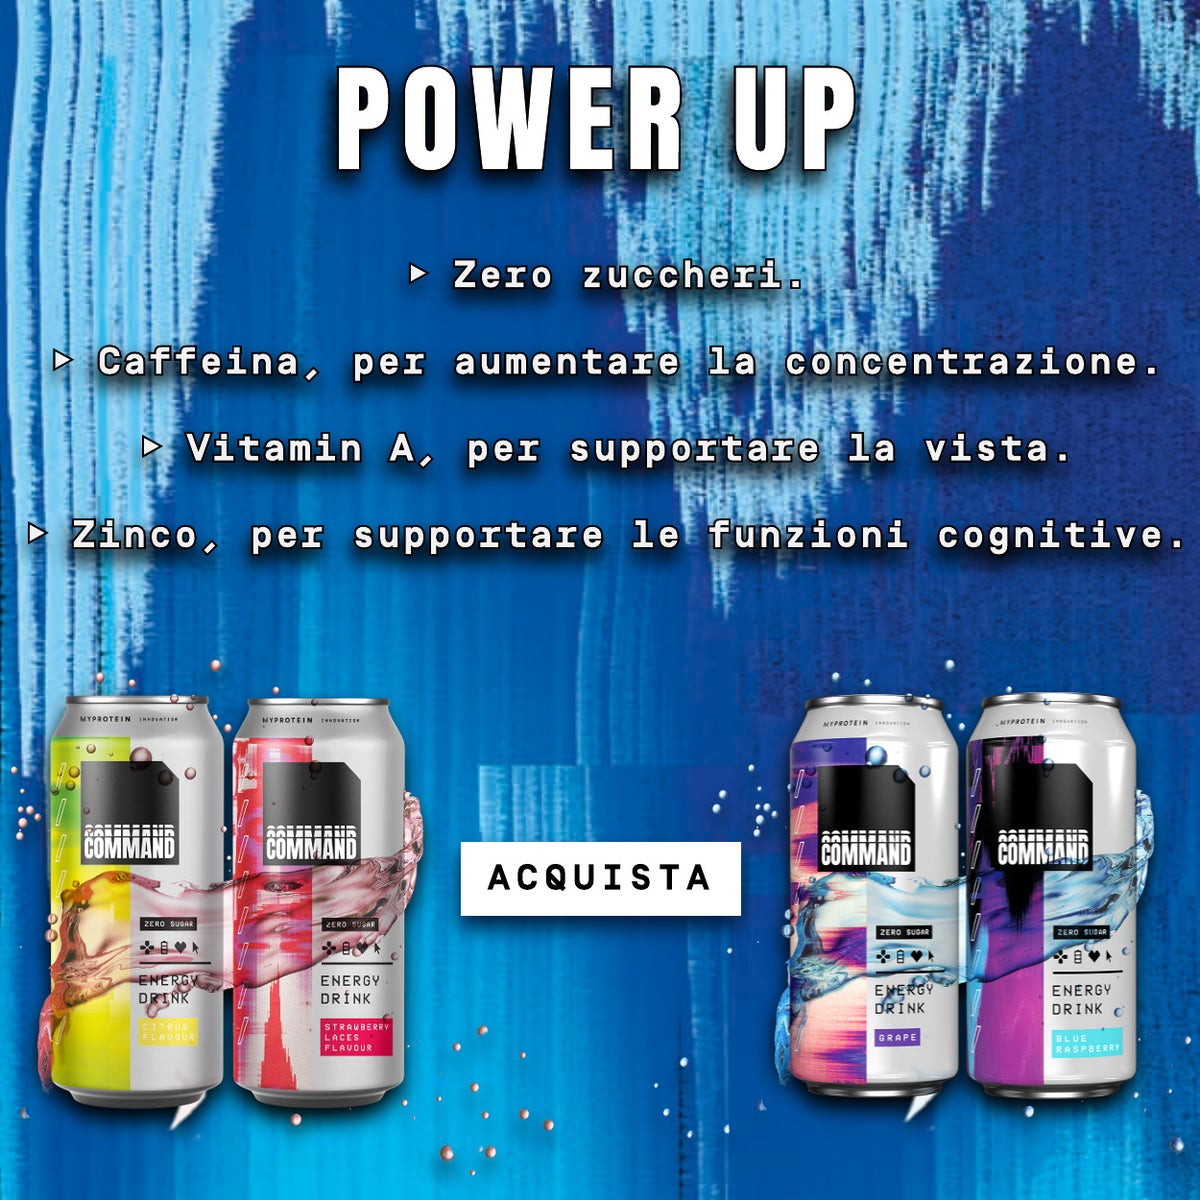 Power Up. Zero sugar & no calories. Caffeine, to boost focus. Vitamin A, to support vision. Zinc, to support cognitive function. Shop Now.